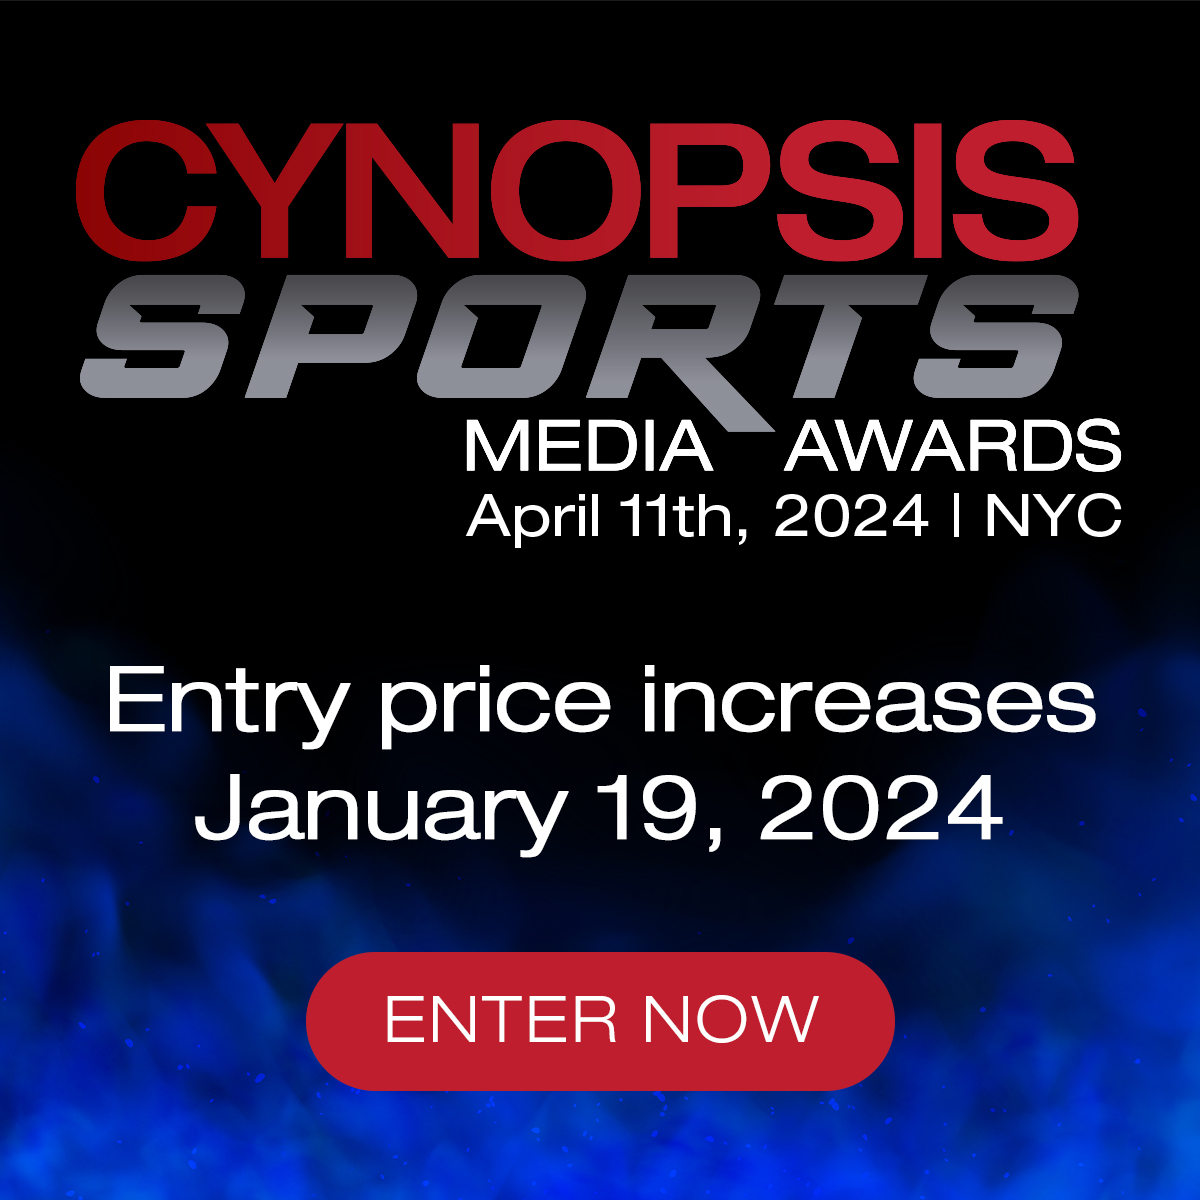 Have you entered for Cynopsis Sports Media Awards yet? Celebrating the best in the business for the 12th consecutive year, we invite you to enter NOW before the entry price increases this Friday, January 19th at 11:59 PM EST! Enter now: cynopsis.com/events/2024-sp…